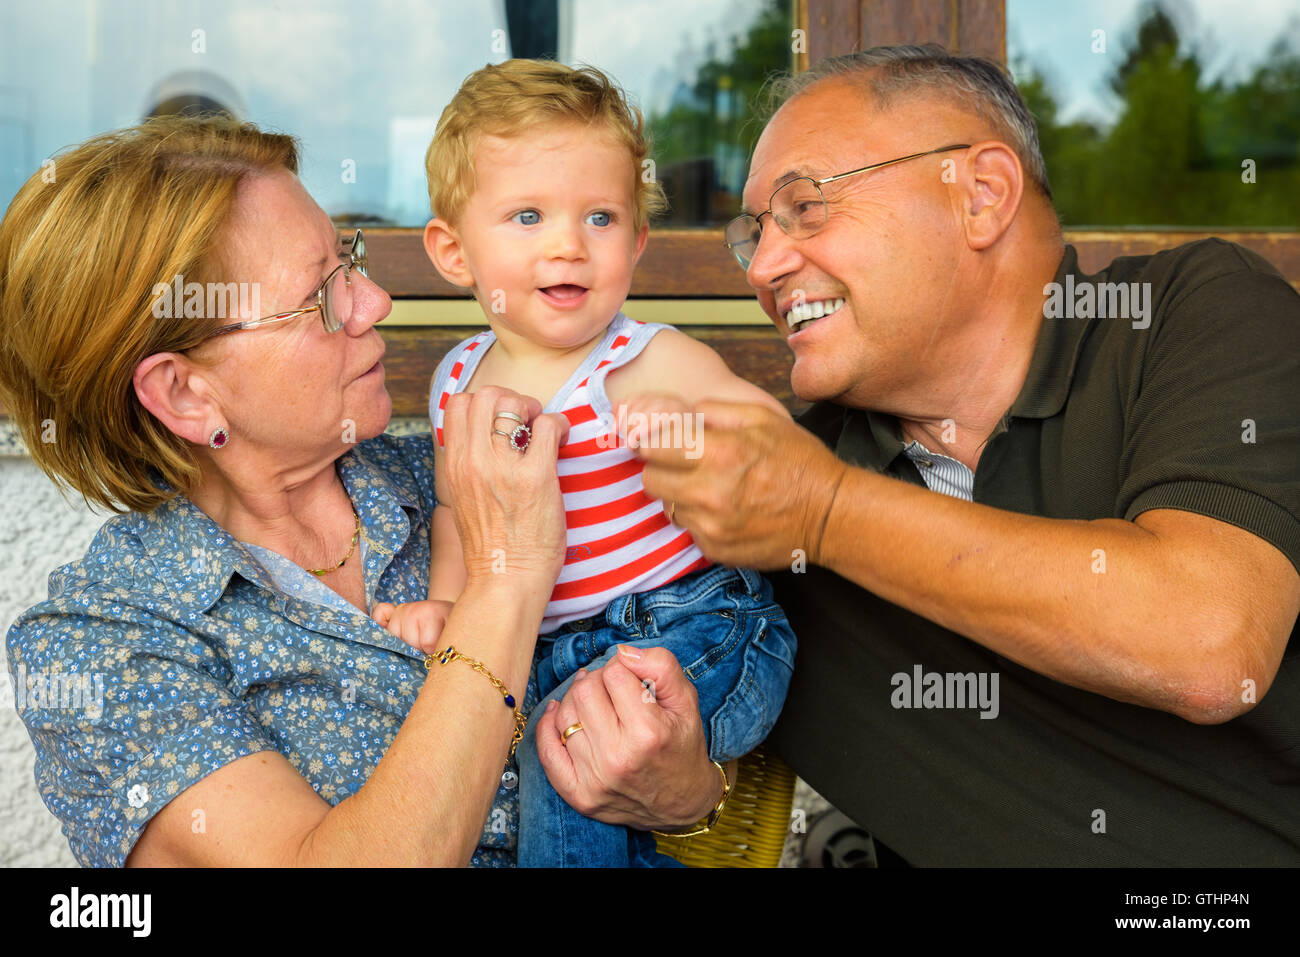 Family moment,Grandparents having great fun with their grandchild. Stock Photo